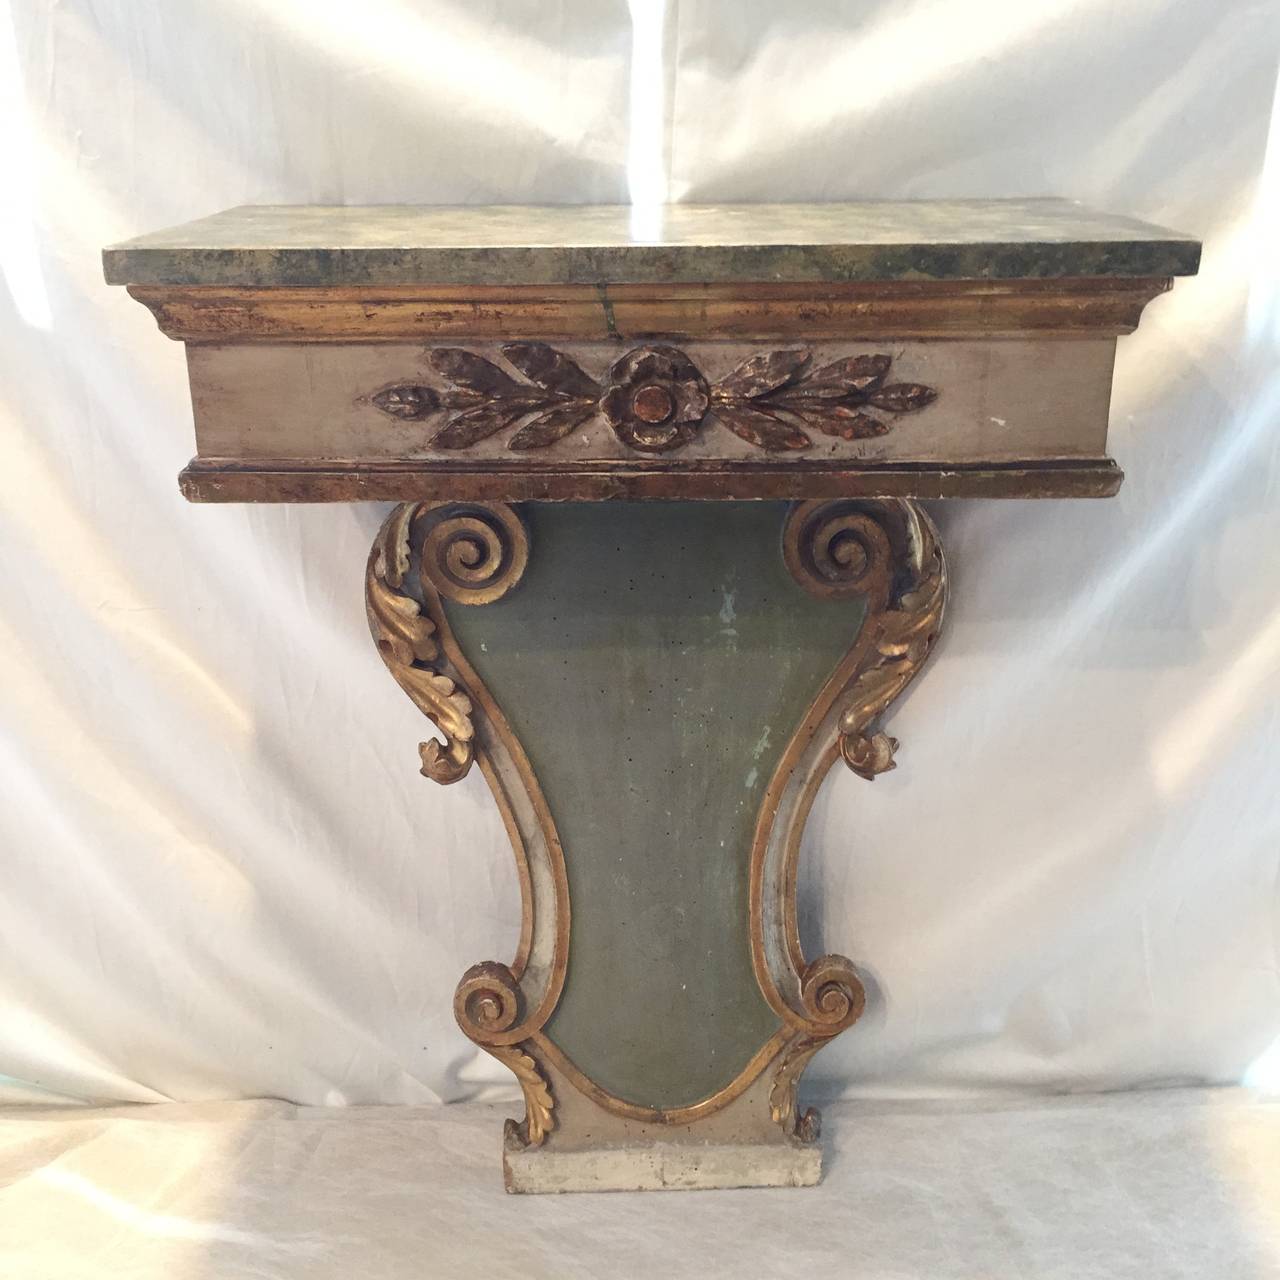 Small console table with gilt carving detail, hand-painted top made to look like marble. Hues of greens, whites, golds and greys throughout. Could work as a small sink pedestal or under a narrow mirror.